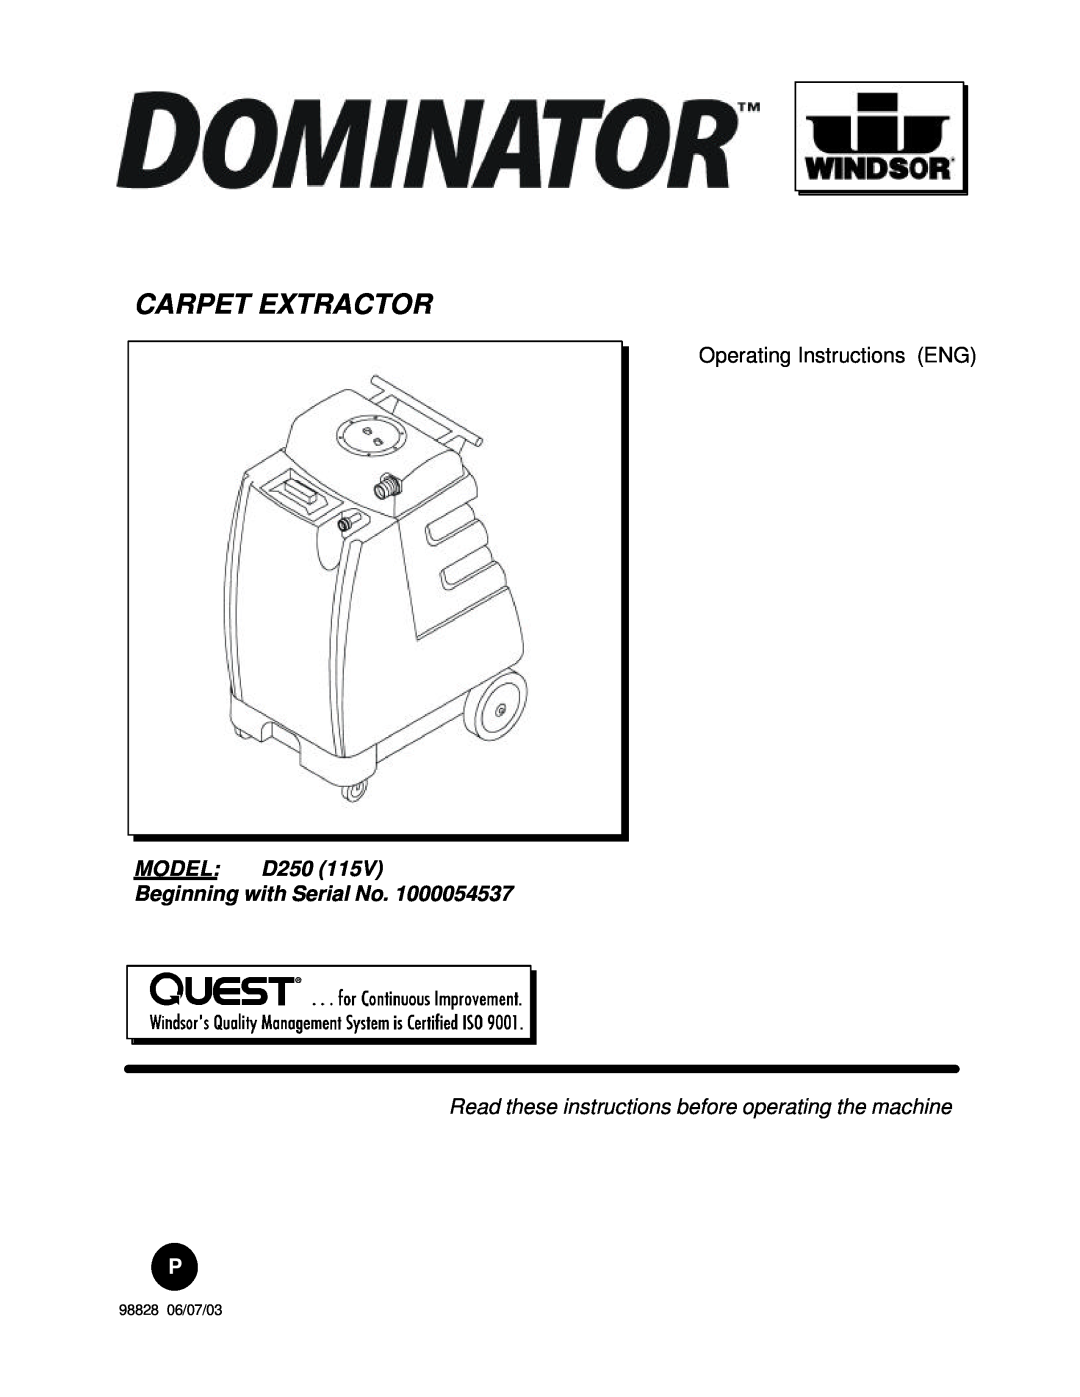 Windsor D250 (115V) manual Carpet Extractor, MODEL D250 Beginning with Serial No, Operating Instructions ENG 